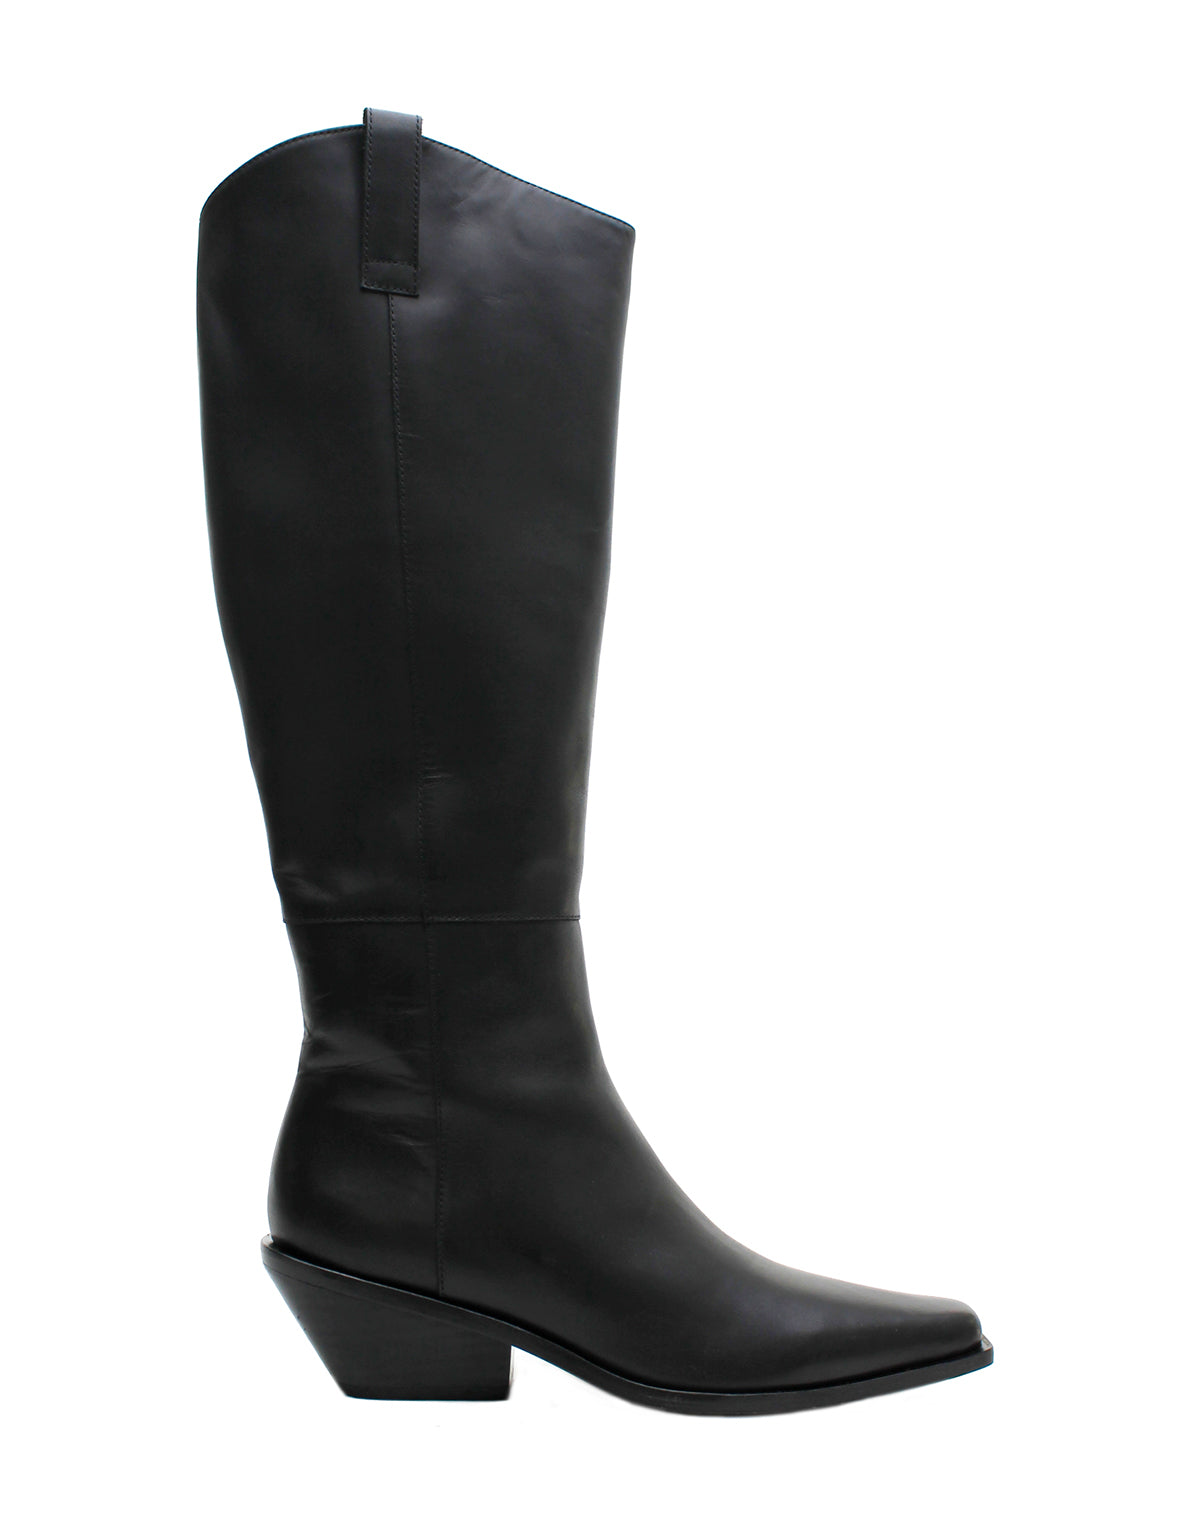 the mid-calf boot - LE CATCH